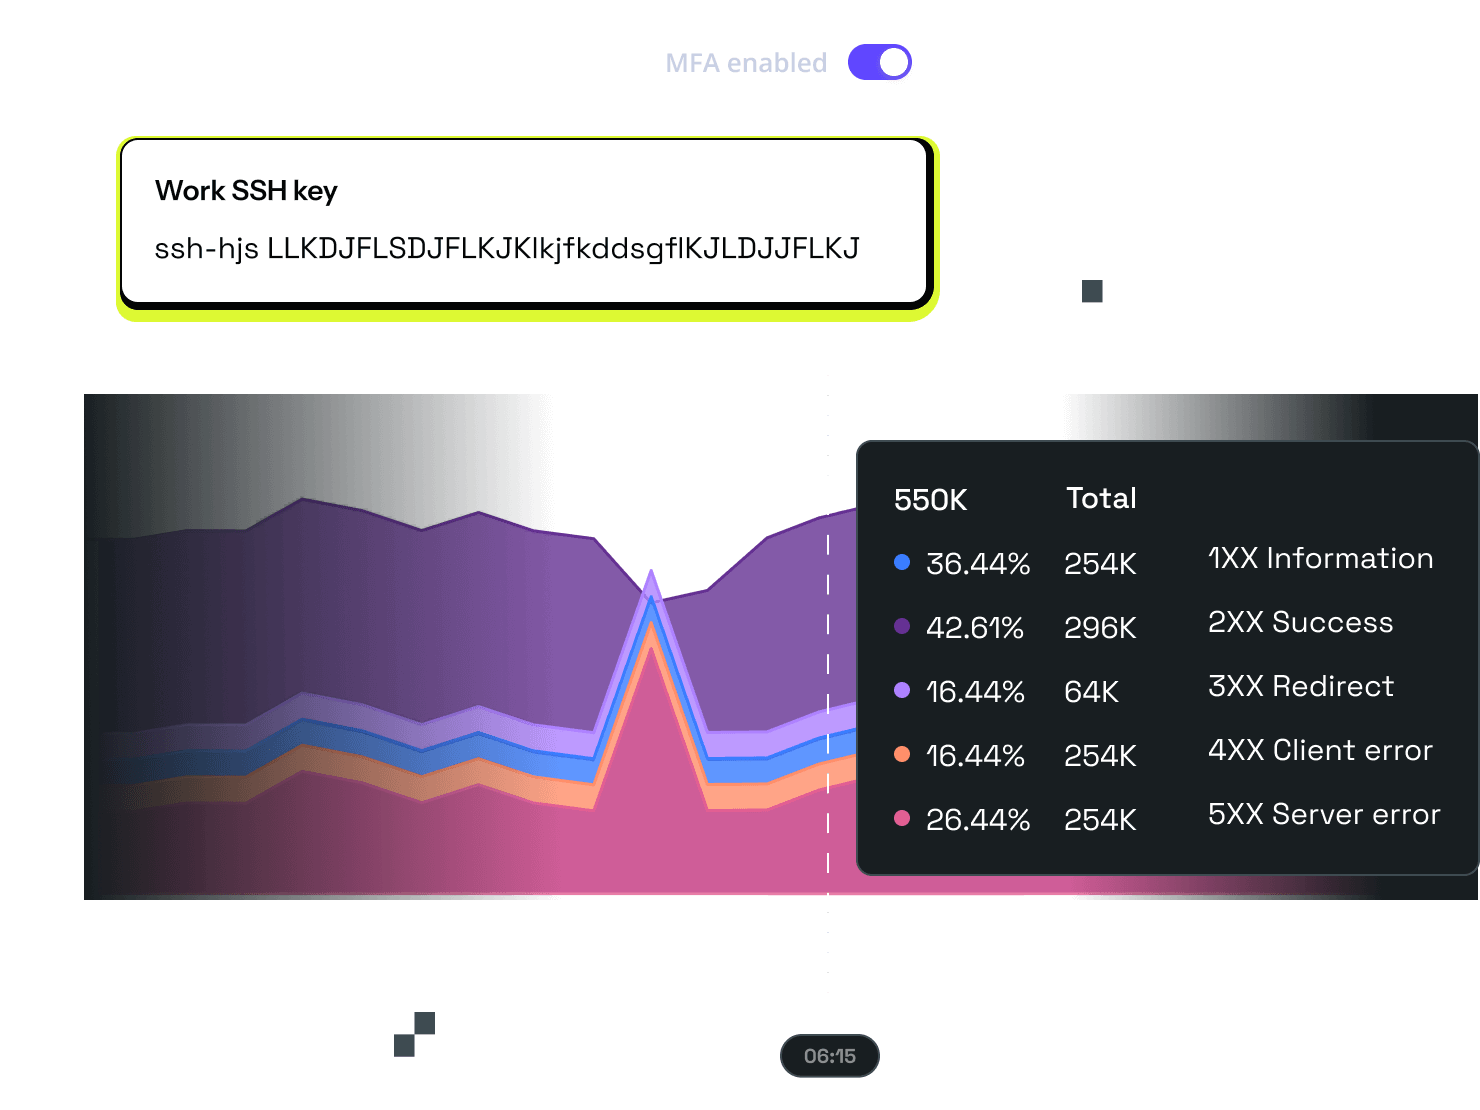 Various versions of UI elements are arranged to show a fill graph in the background, with several layers of peaks and valleys. Above the graph is a toggle to enable MFA and a box showing a Work SSH key. To the right of this is a box showing labels and percentages for the graph.